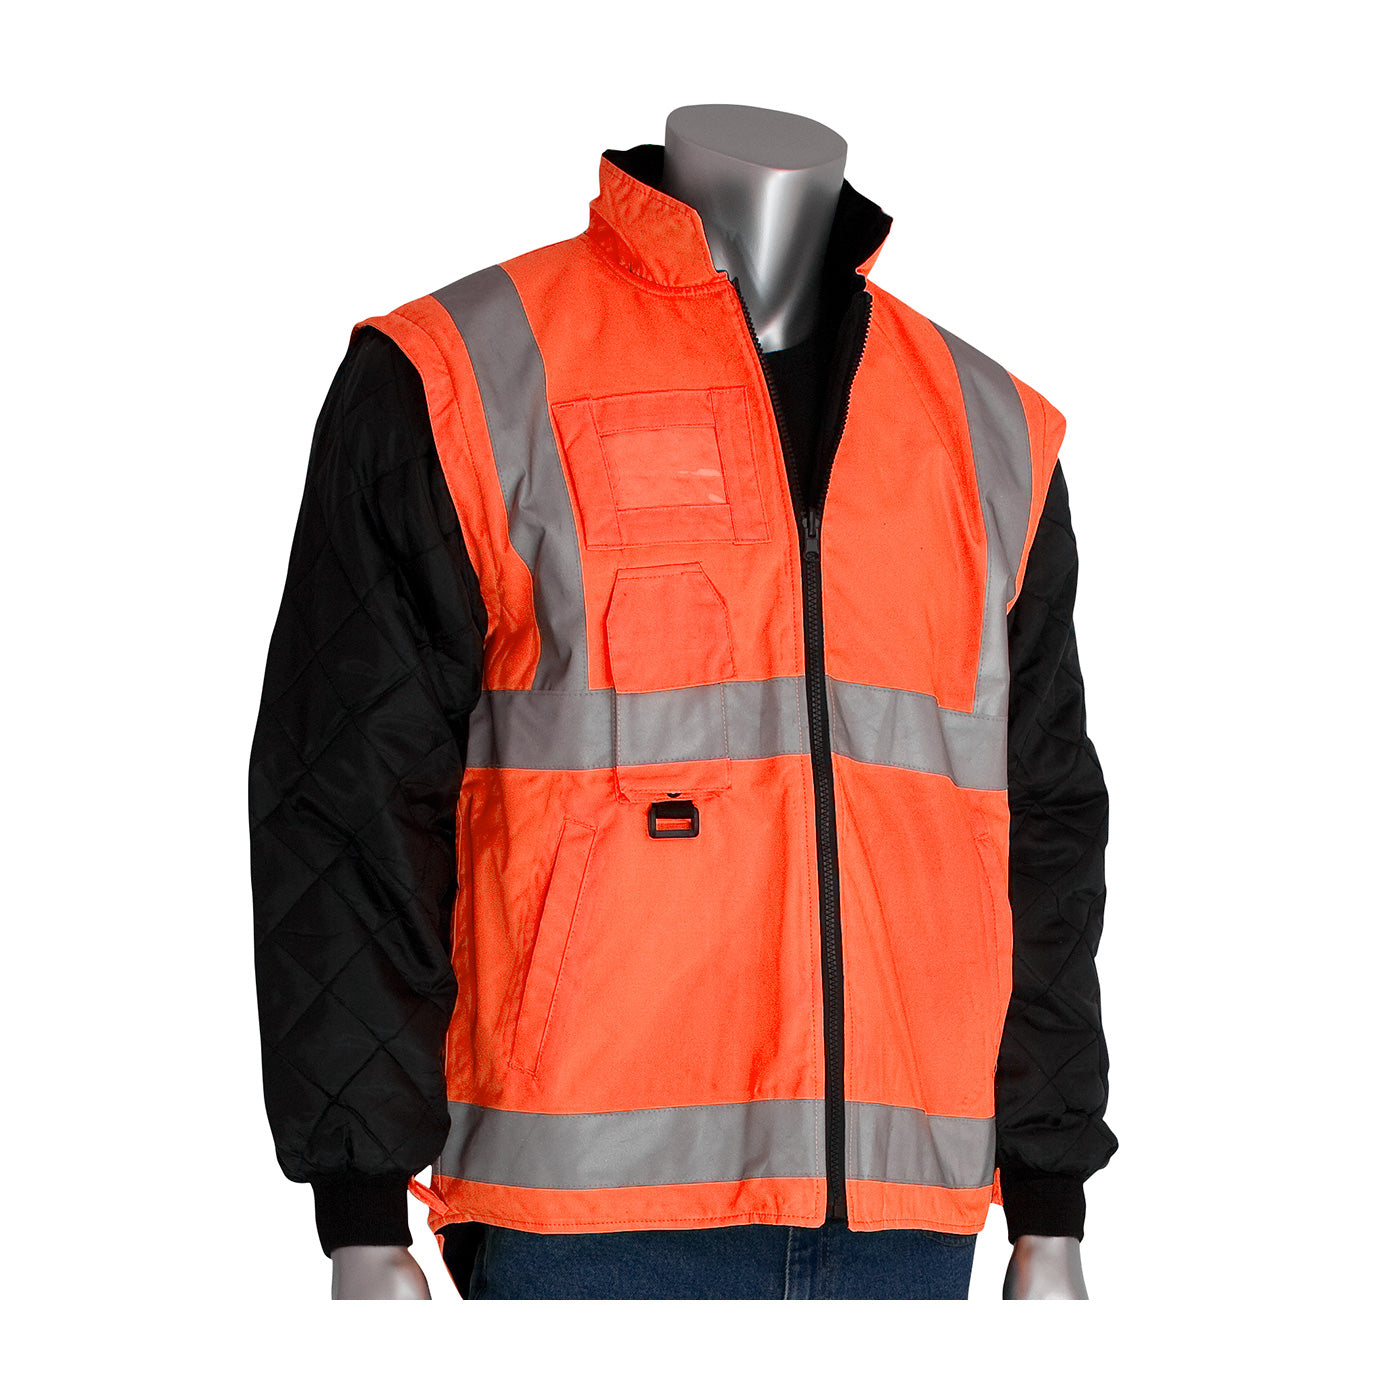 PIP 343-1756-OR/2X ANSI Type R Class 3 7-in-1 All Conditions Coat with Inner Jacket and Vest Combination